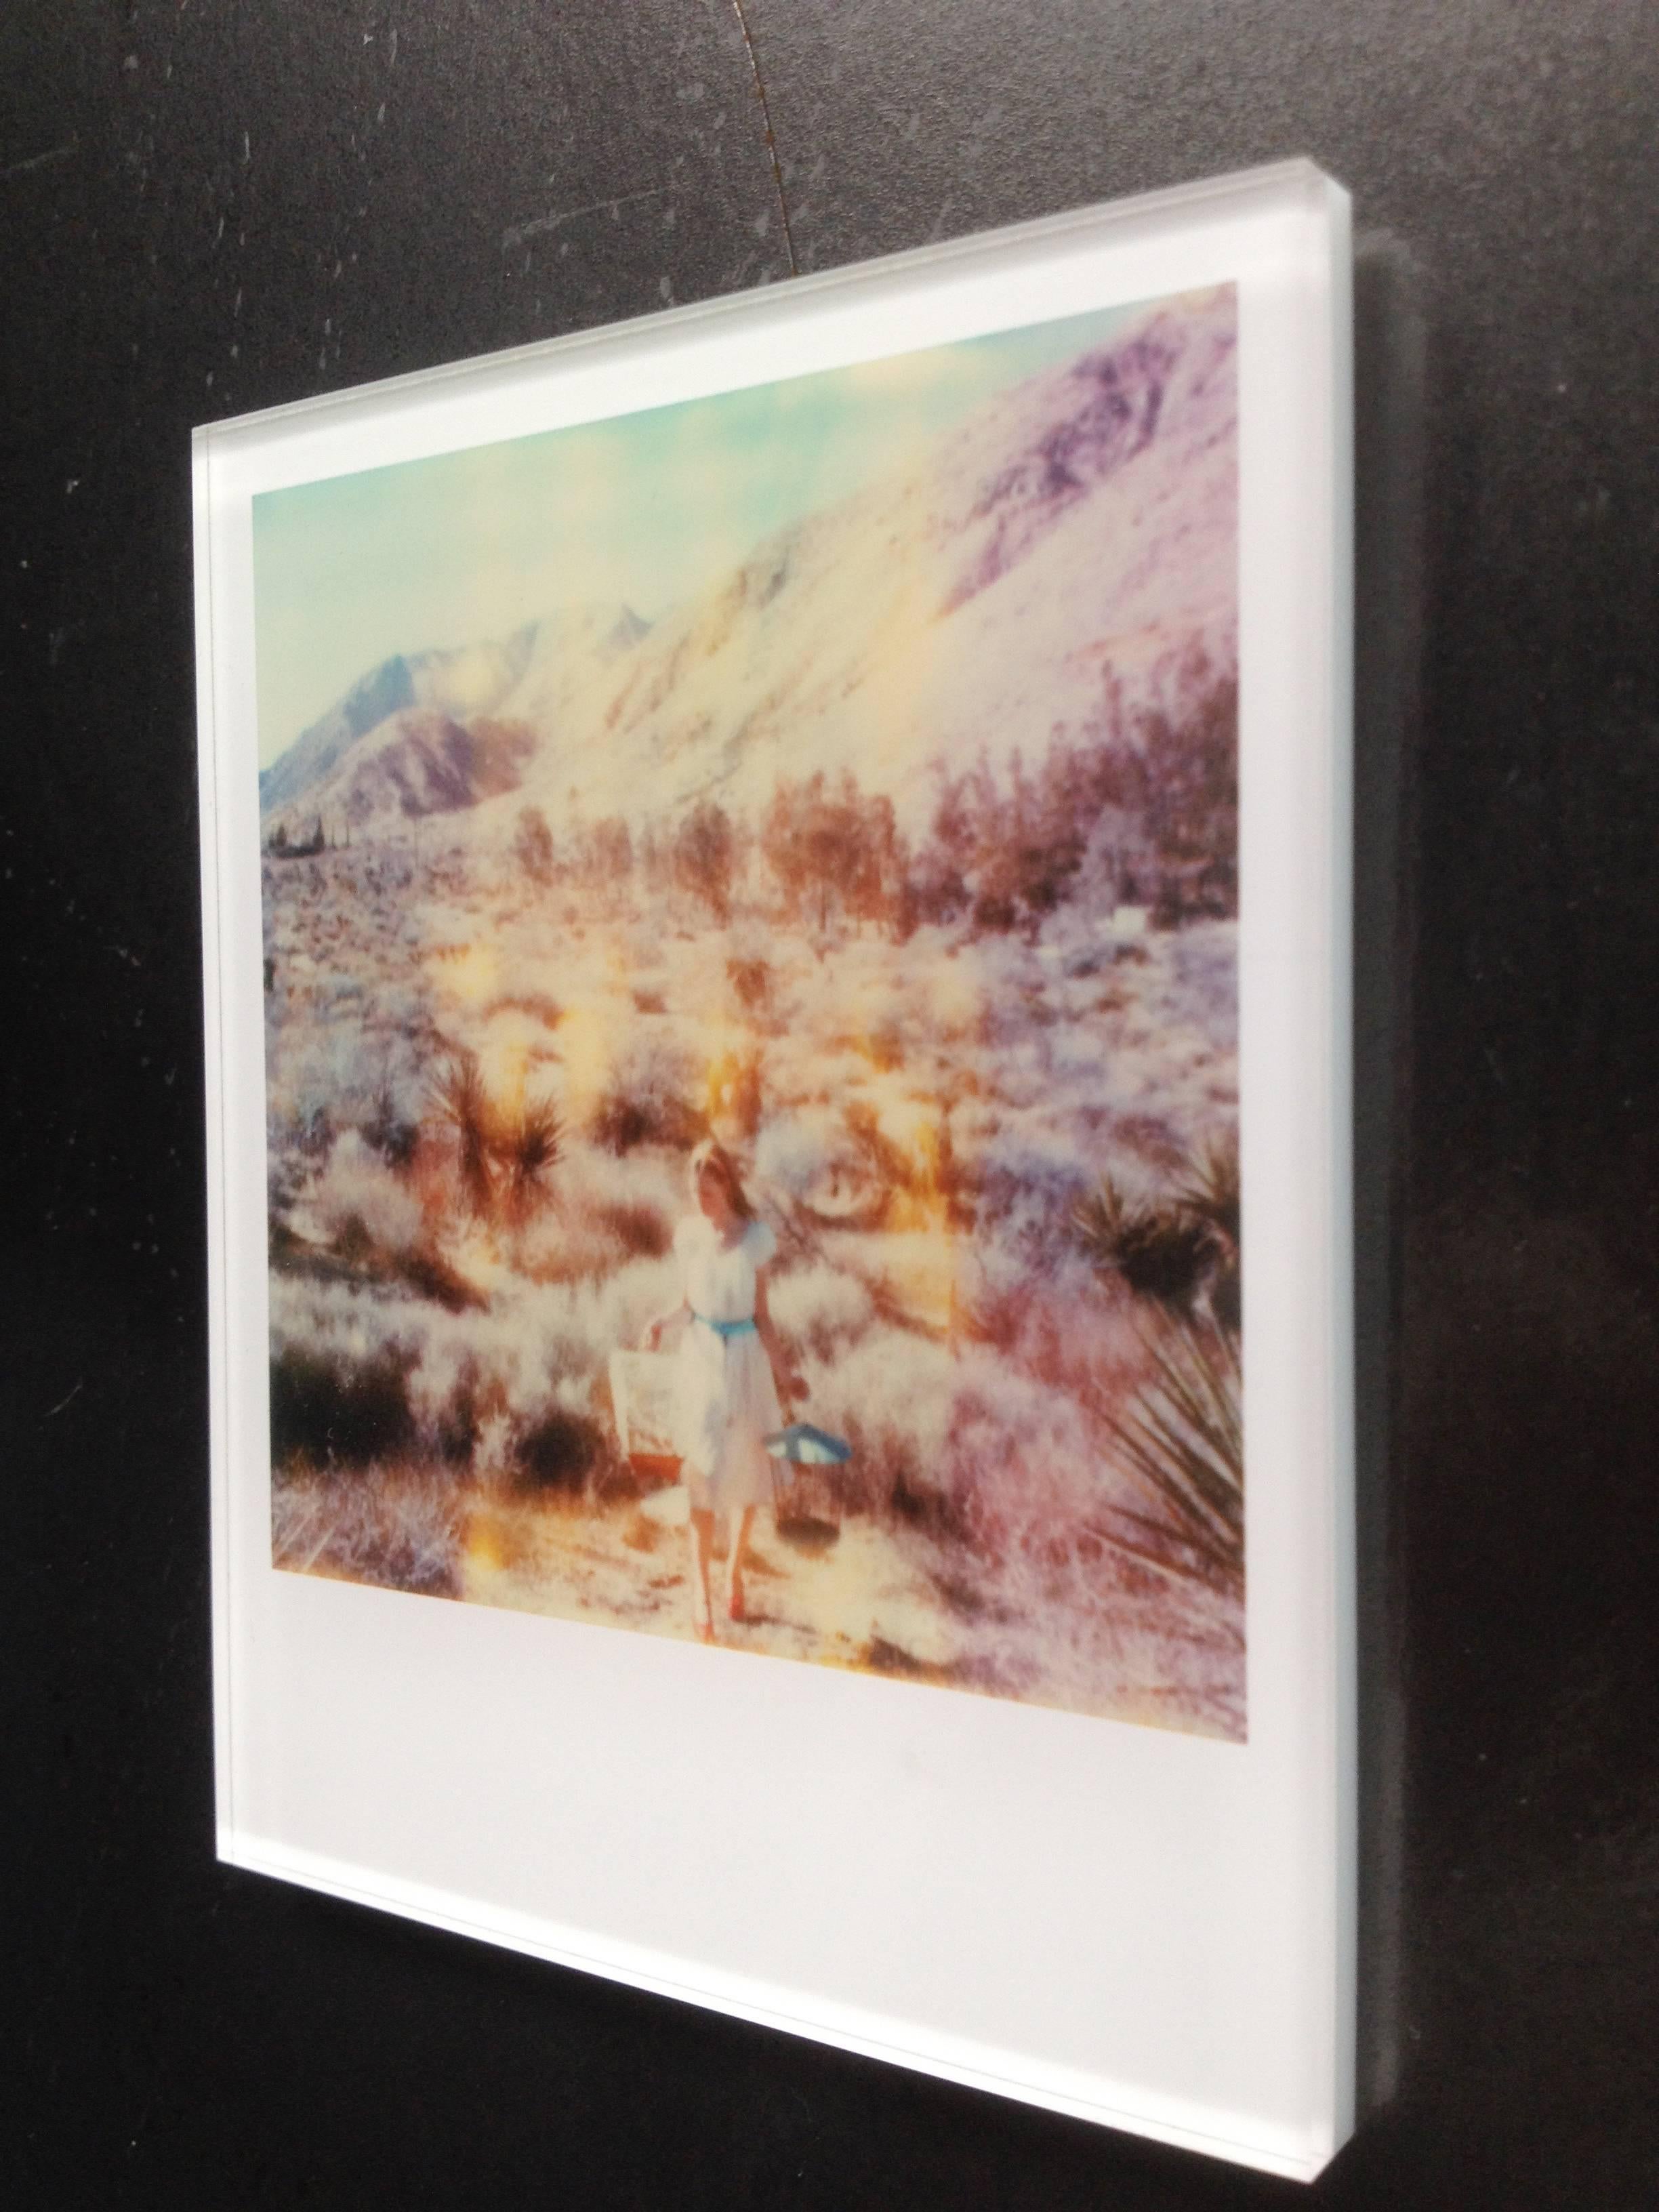 Stefanie Schneider's Minis
'Runaway' (Haley and the Birds) 2013
signed and signature brand on verso
Lambda digital Color Photographs based on a Polaroid

Polaroid sized open Editions 1999-2013
10.7 x 8.8cm (Image 7.9x7.7cm)
mounted: sandwiched in